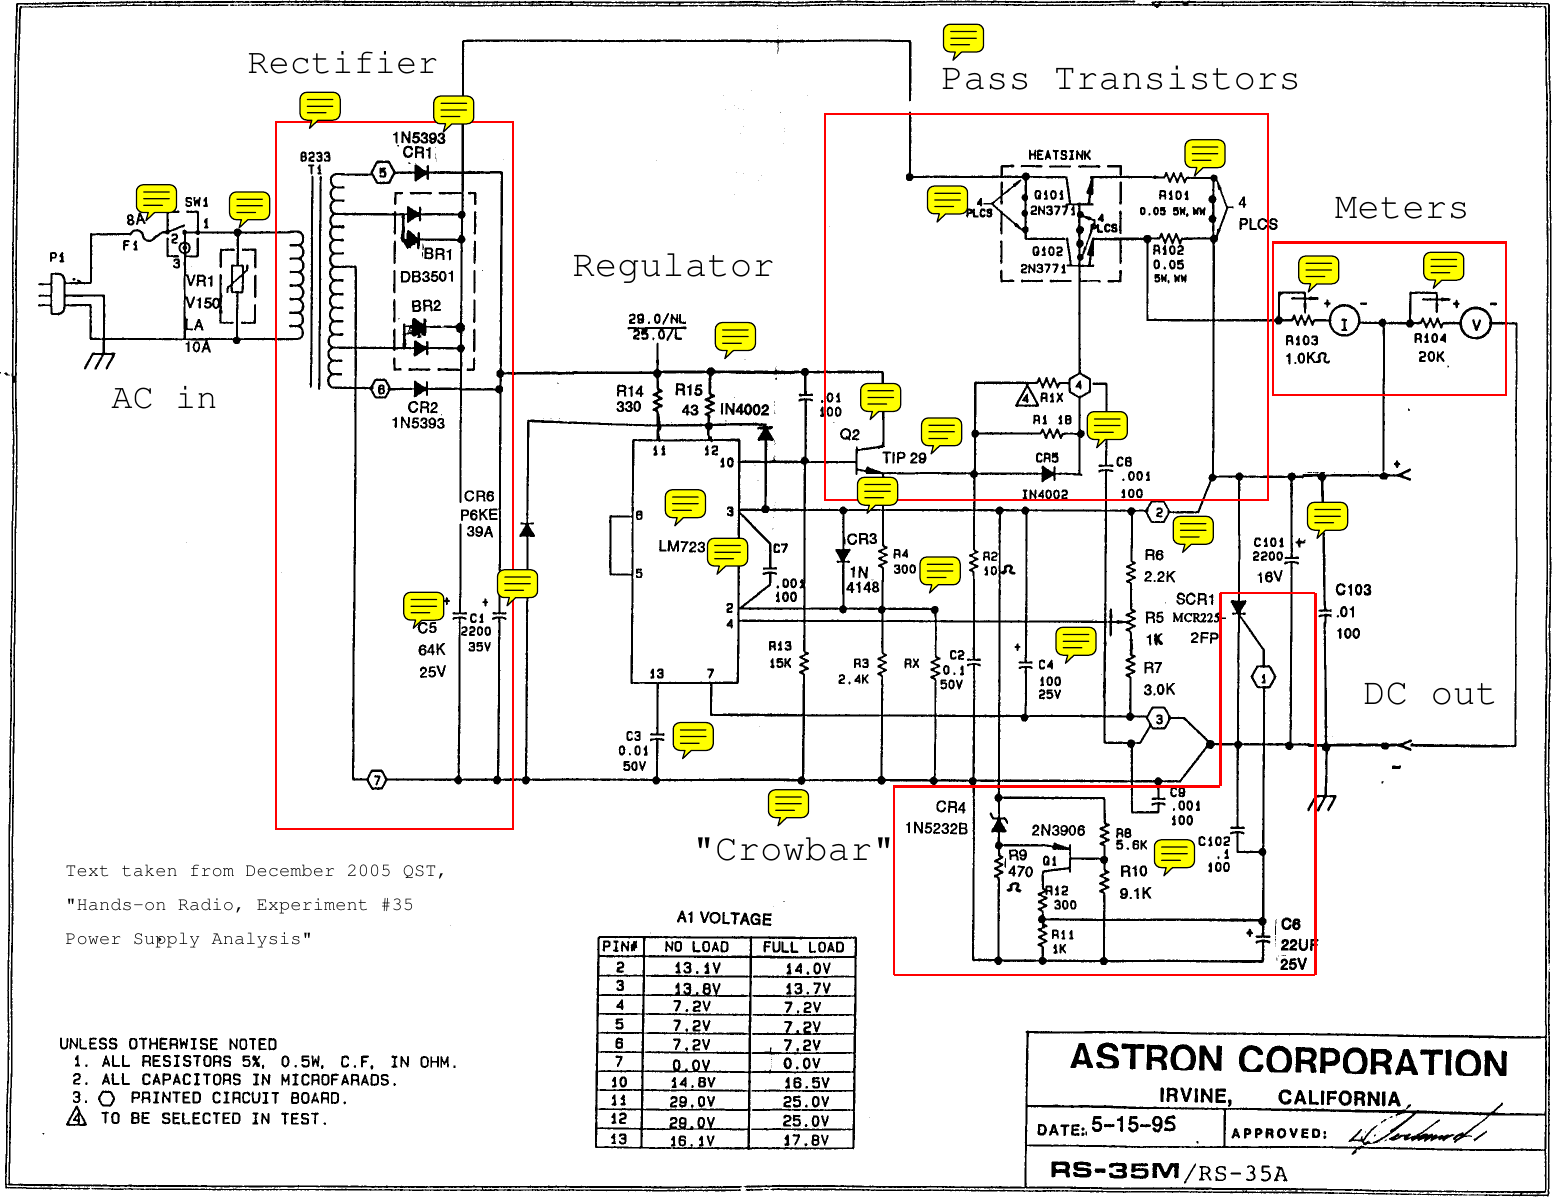 HUGE SET  of Astron Power Supply Schematics on CD in .pdf Free Ship! 